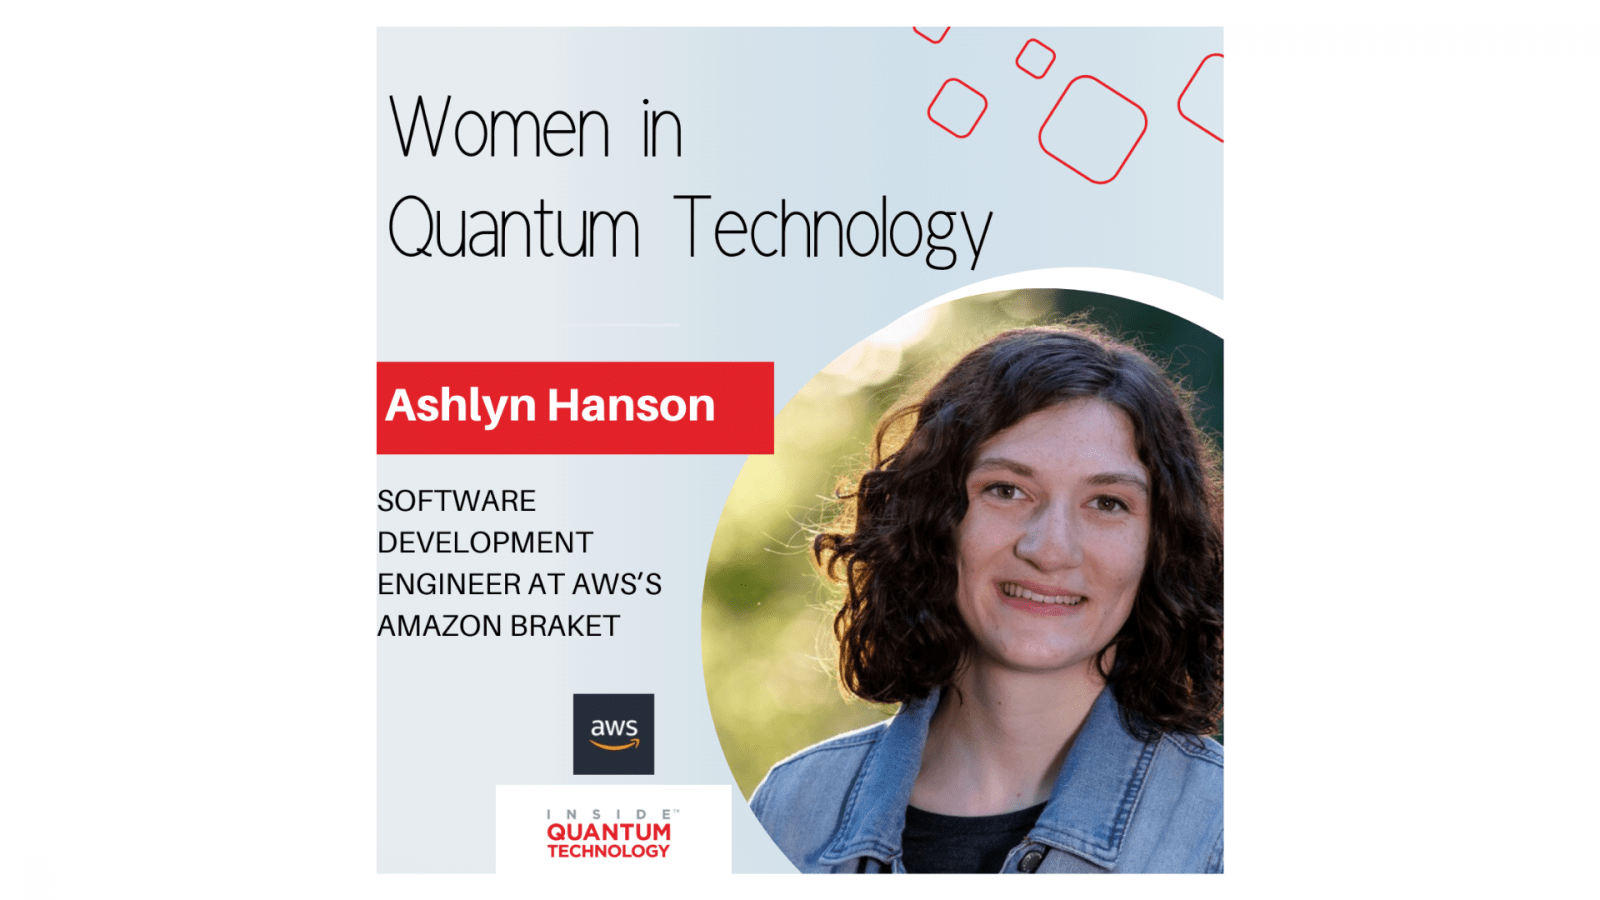 Ashlyn Hanson of AWS's Amazon Braket discusses her journey into the quantum industry and wider ecosystem.